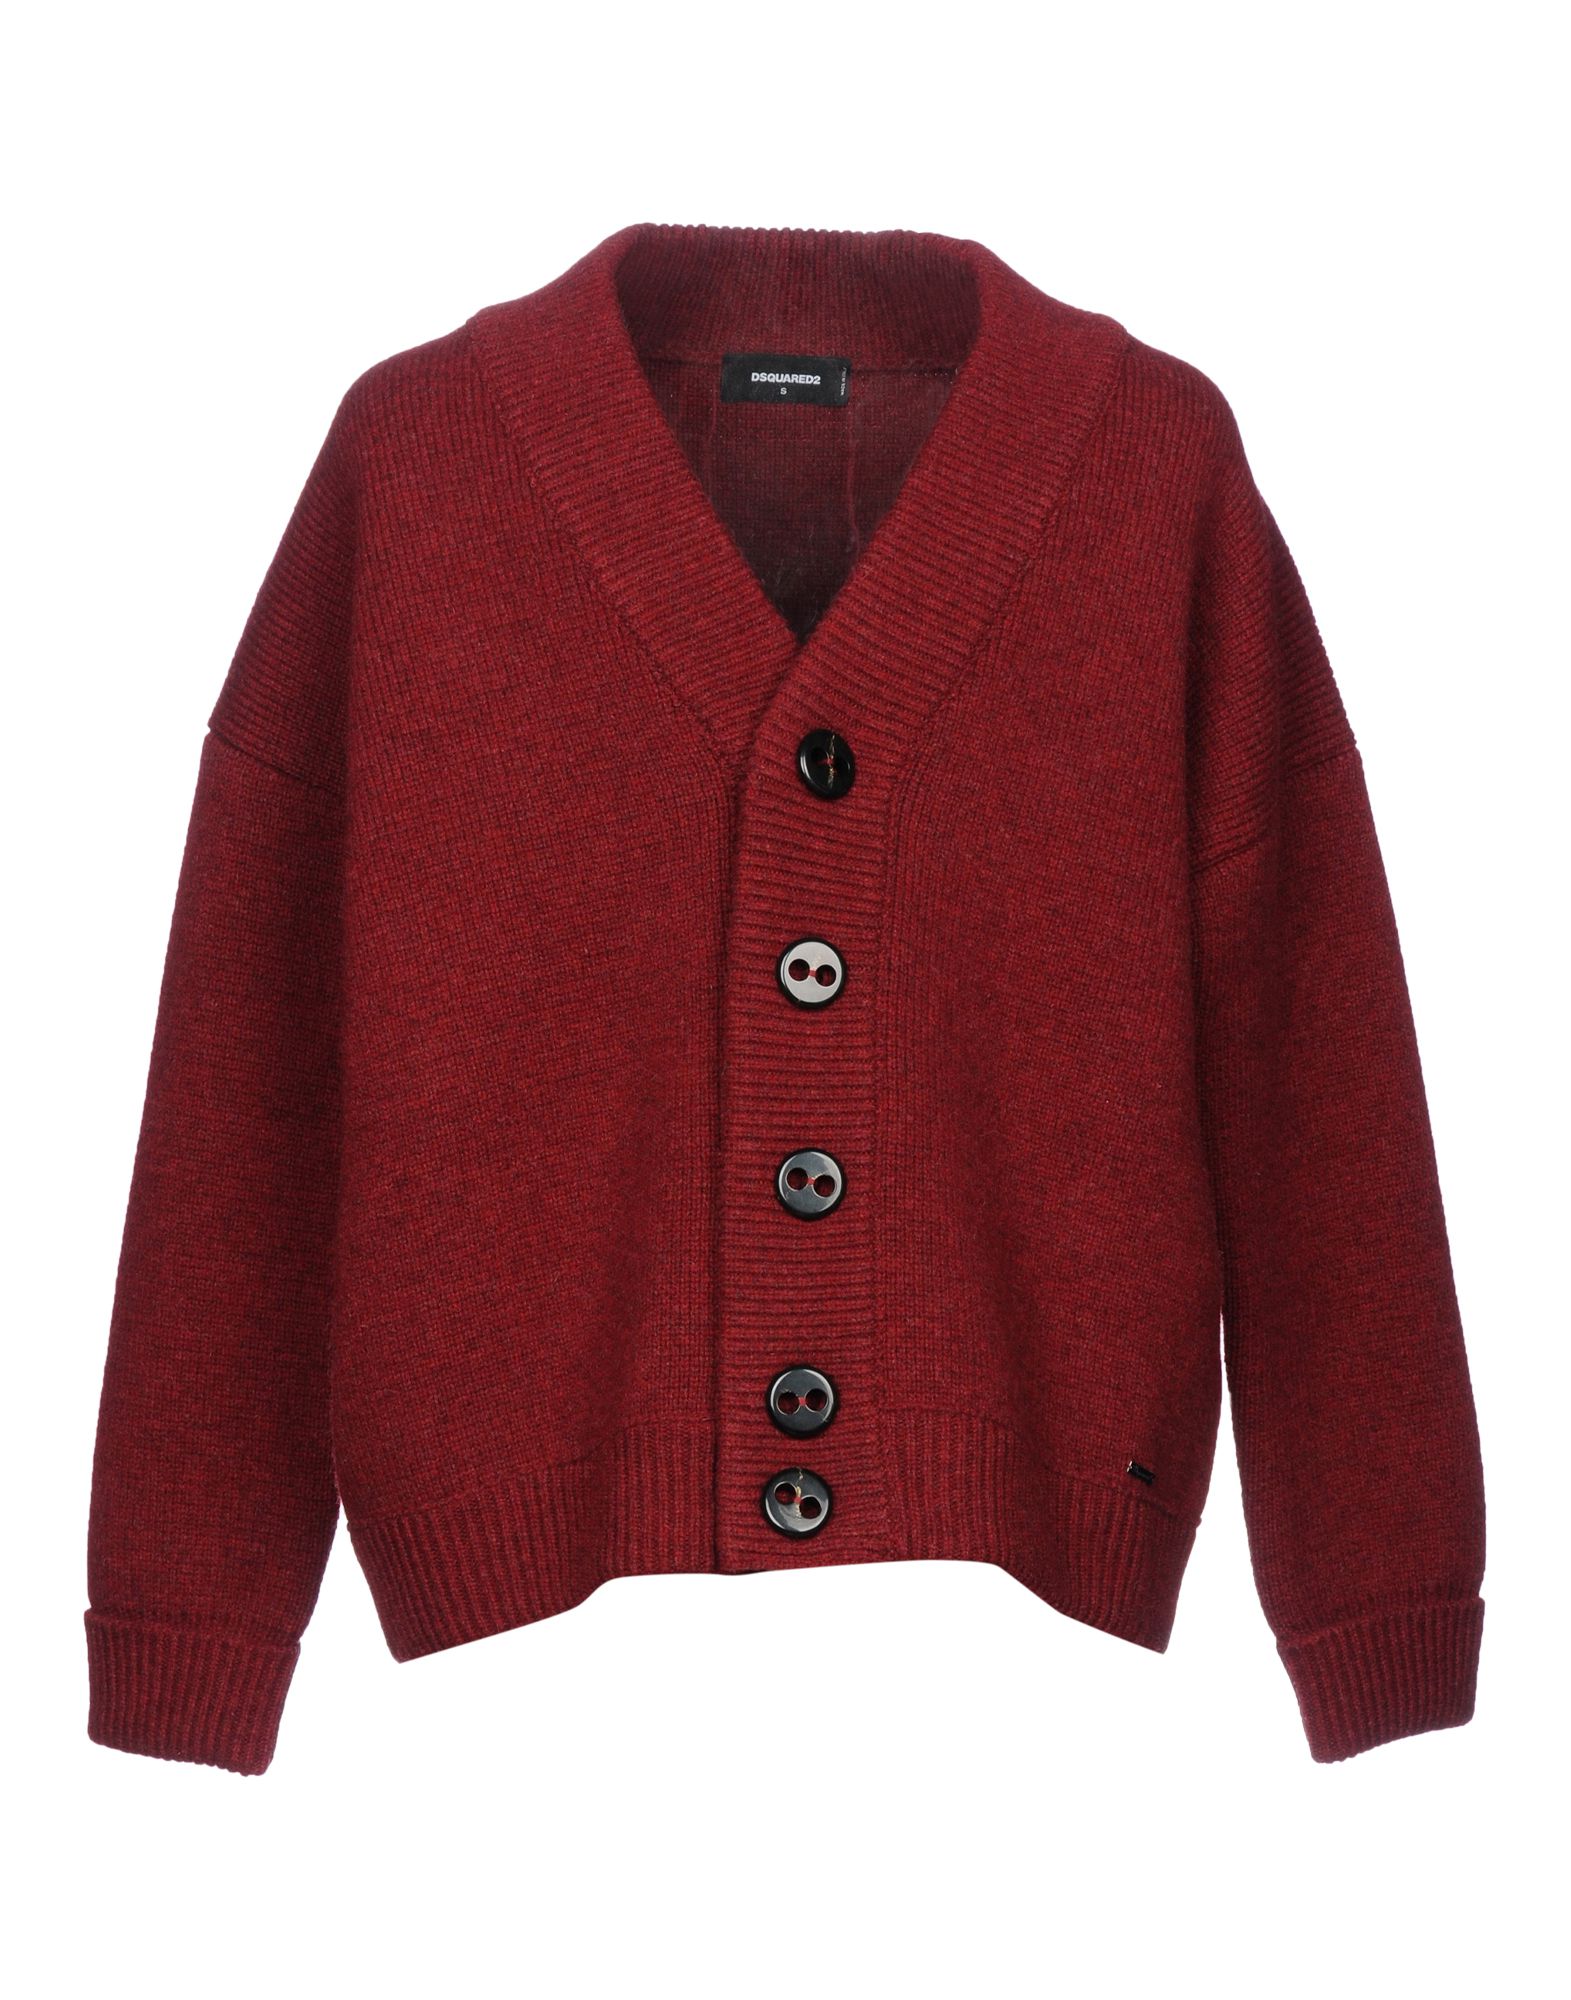 DSQUARED2 CARDIGANS,39854803OI 3